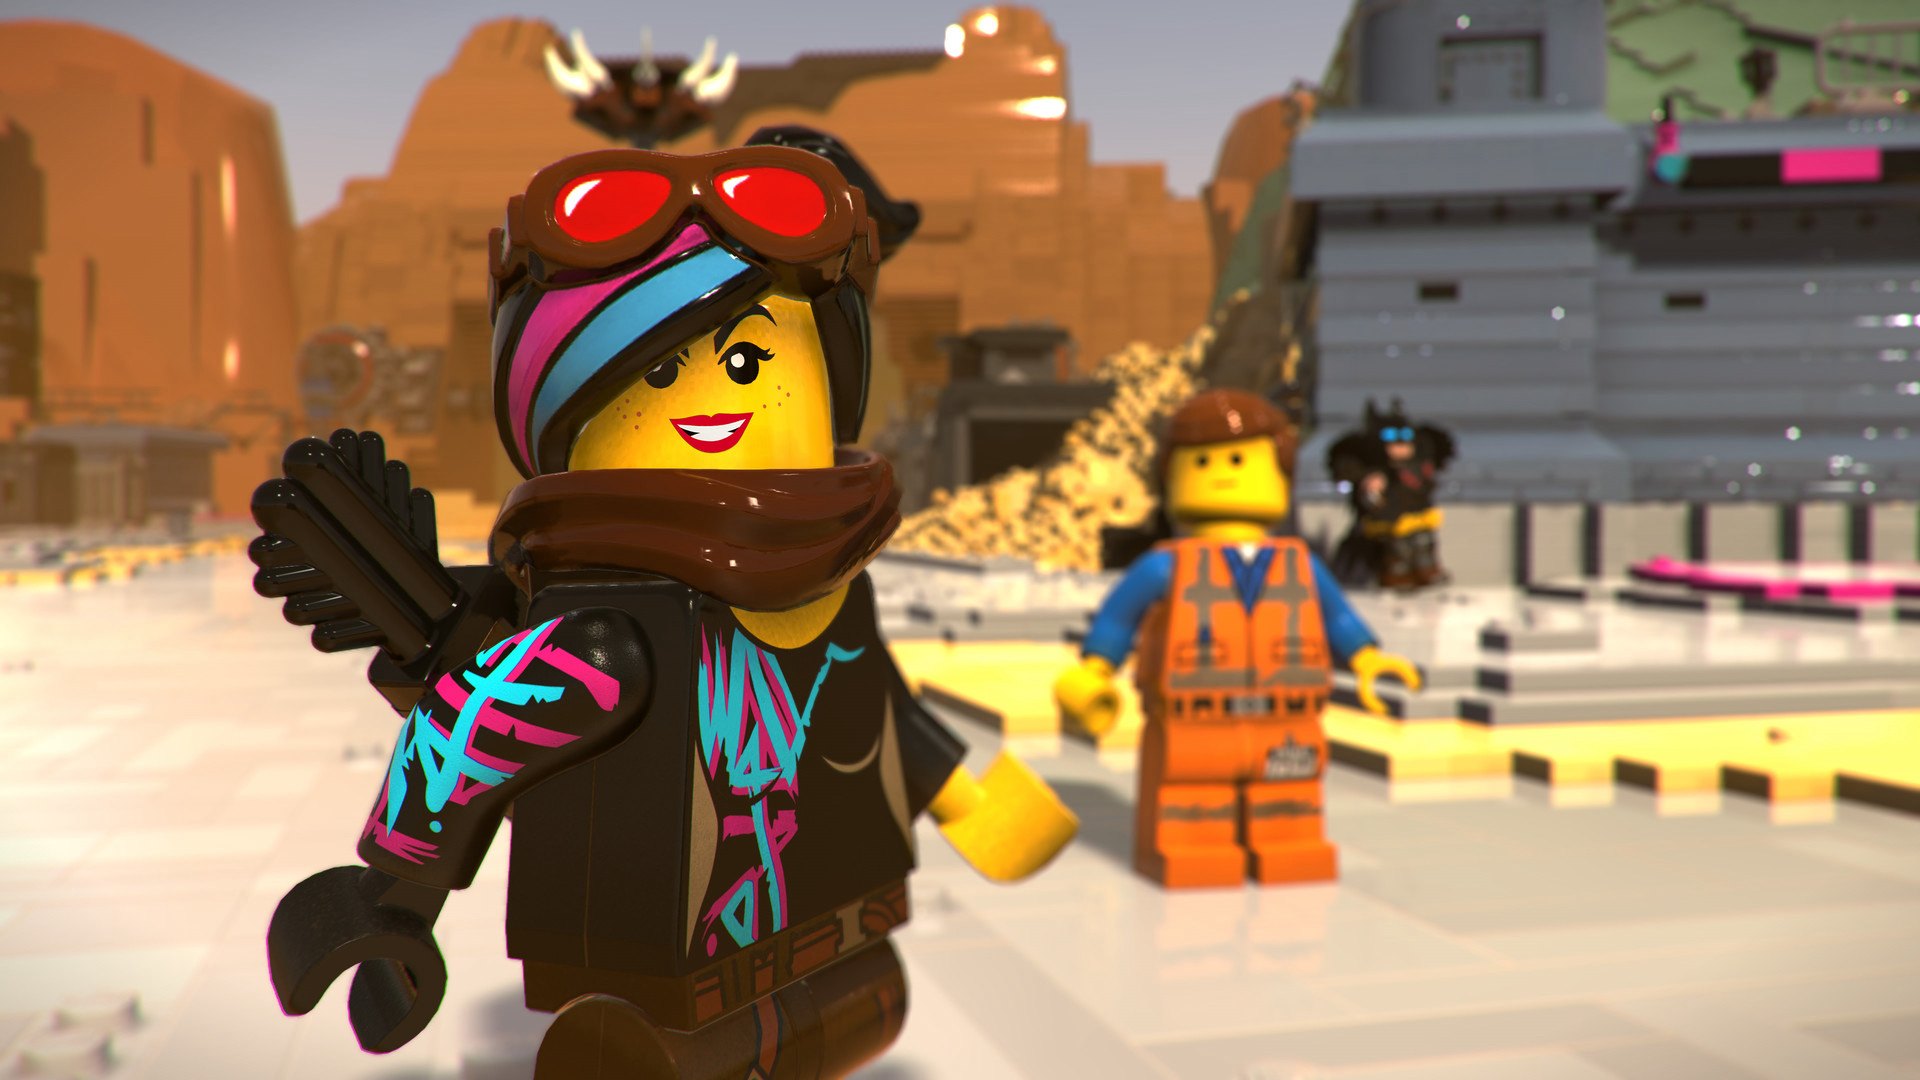 The LEGO Movie 2 Videogame PlayStation 4 Account, 25.25$